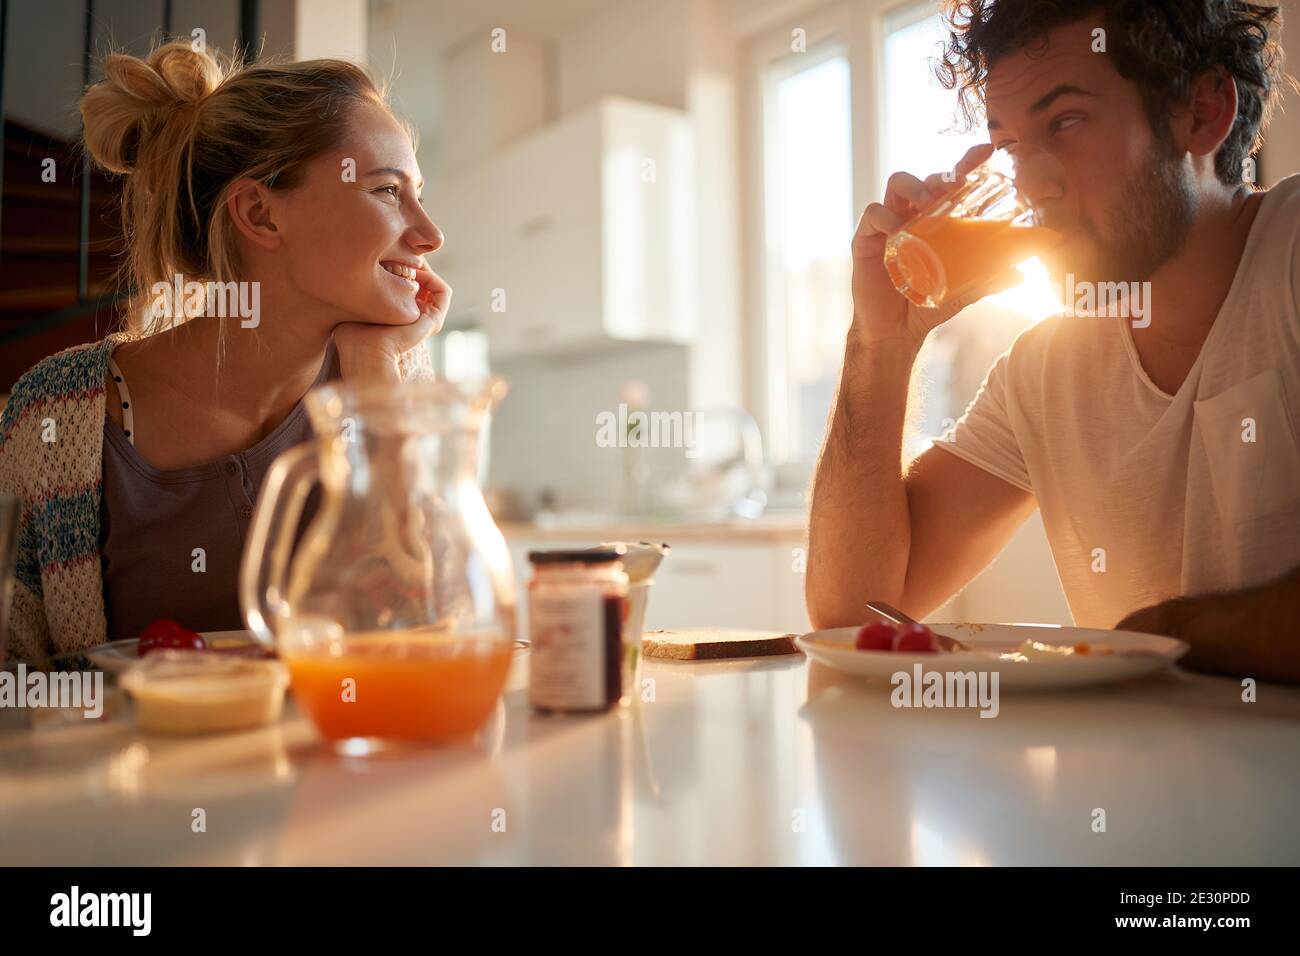 A young couple in love relaxing at the table after breakfast on a beautiful sunny morning at home. Relationship, love, together, breakfast Stock Photo